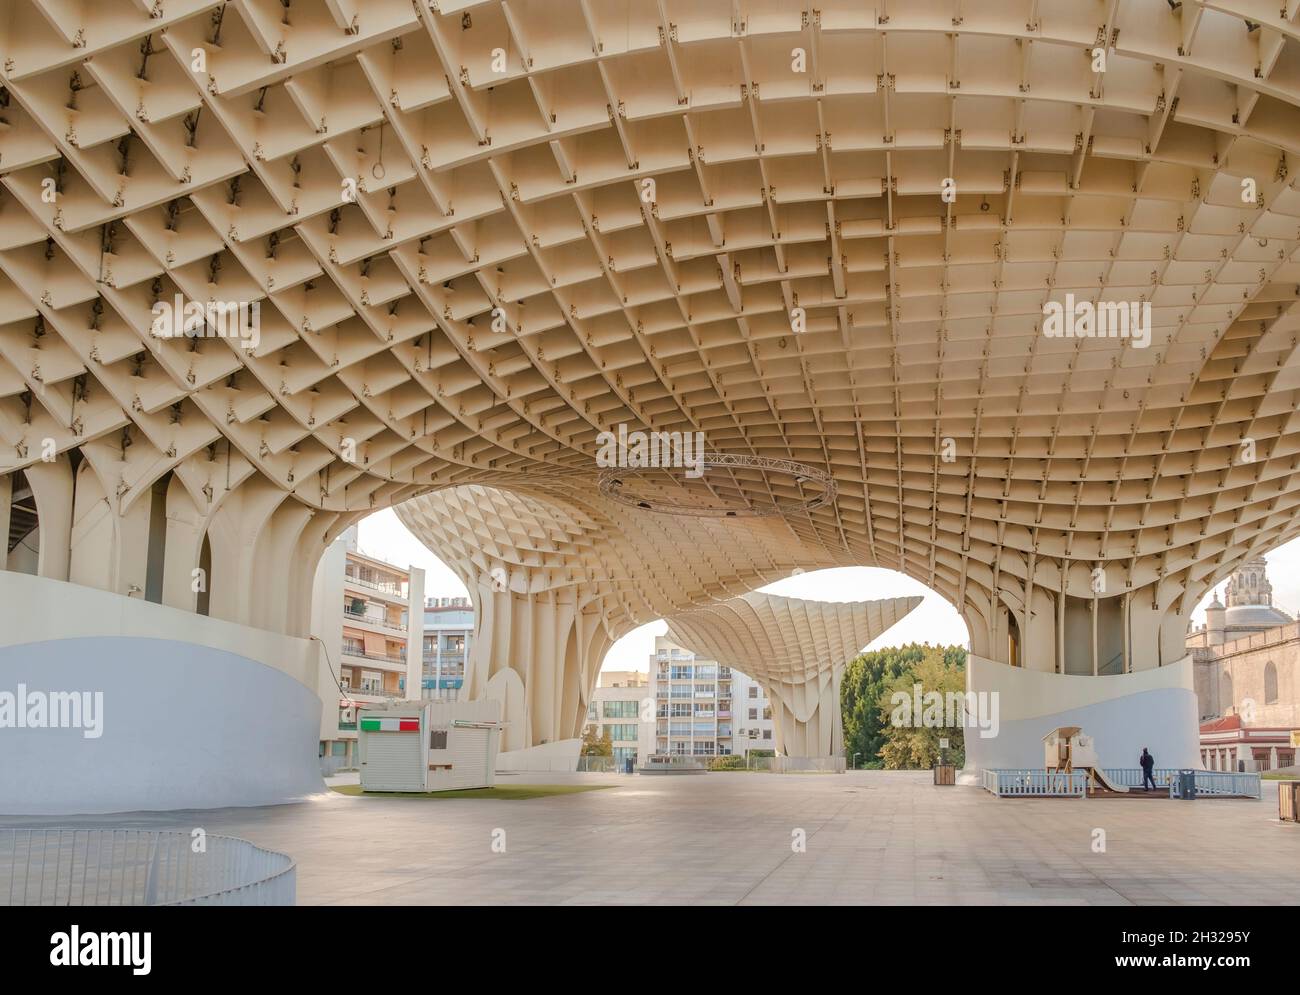 Metropol Parasol is a wooden structure located at La Encarnacion square, in the old quarter of Seville, Spain. It was designed by the German architect Stock Photo